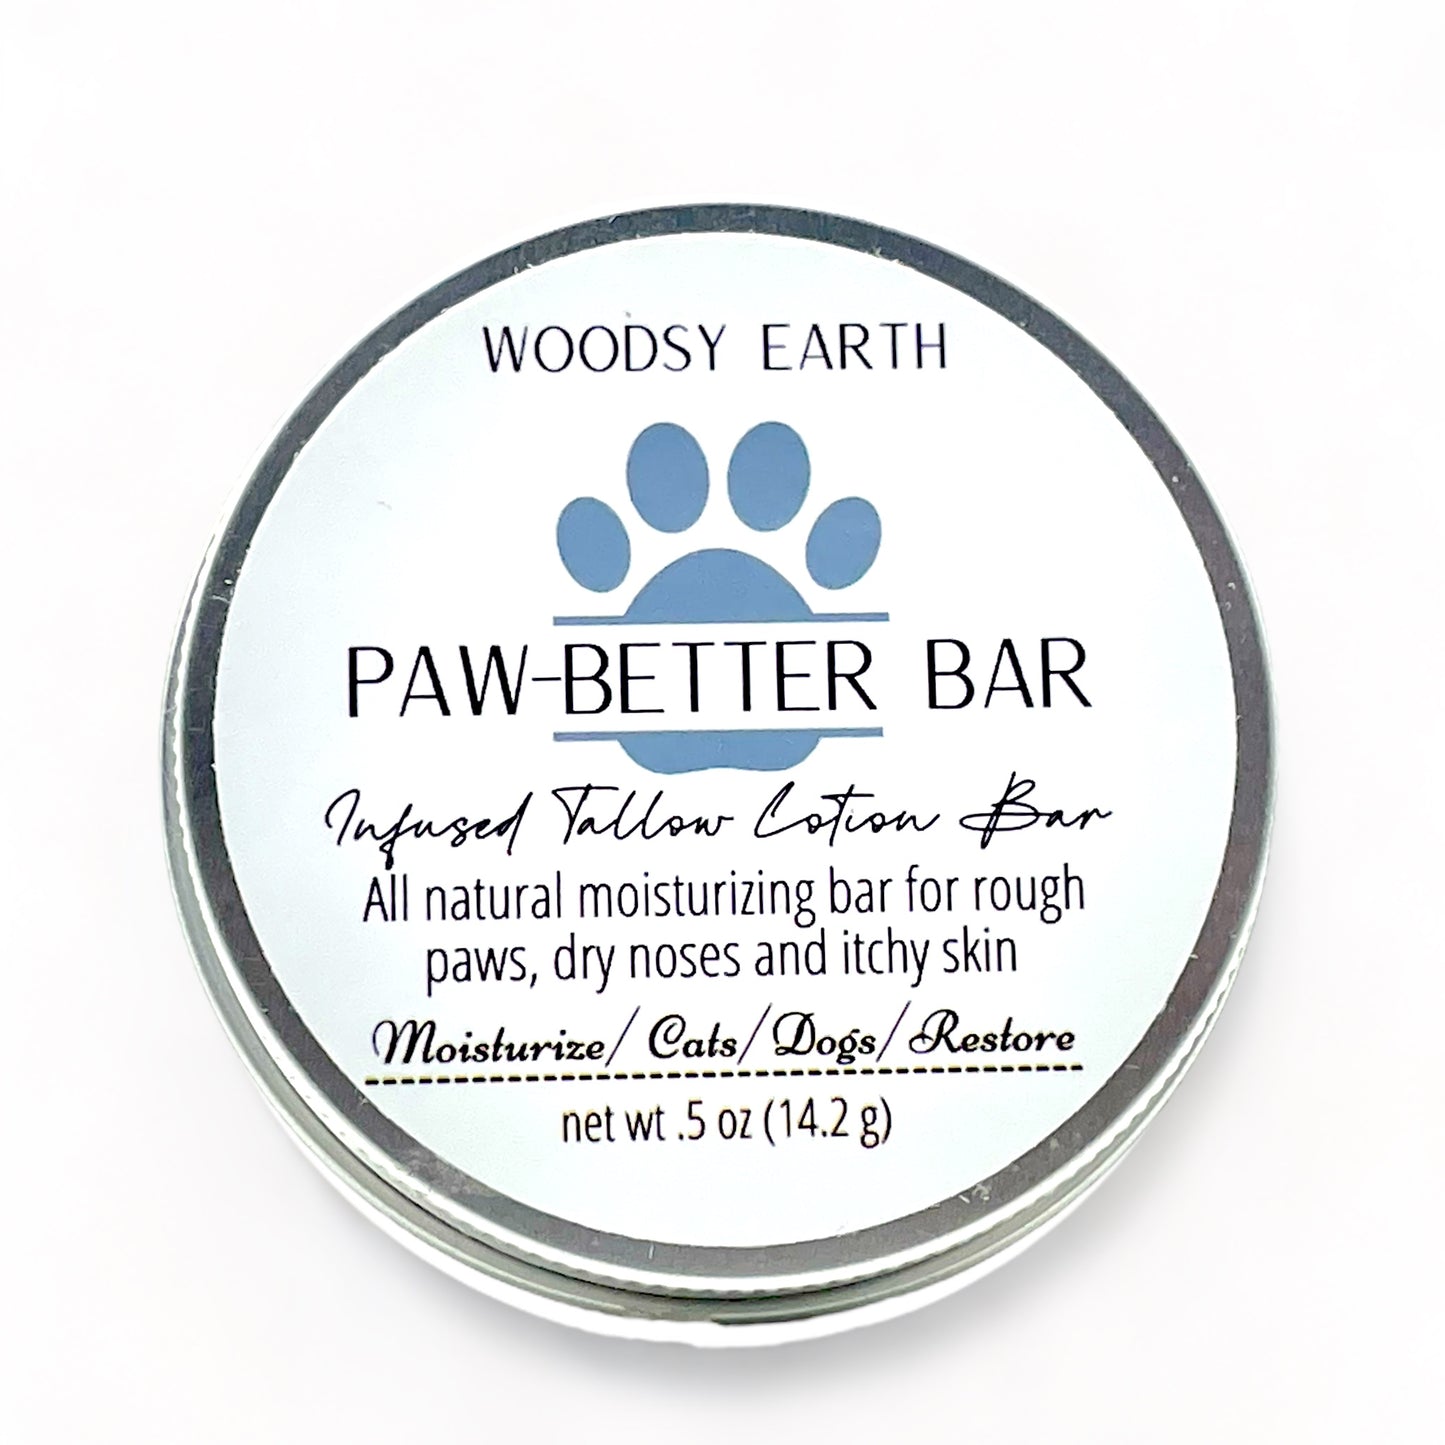 Paw-Better Lotion Bar